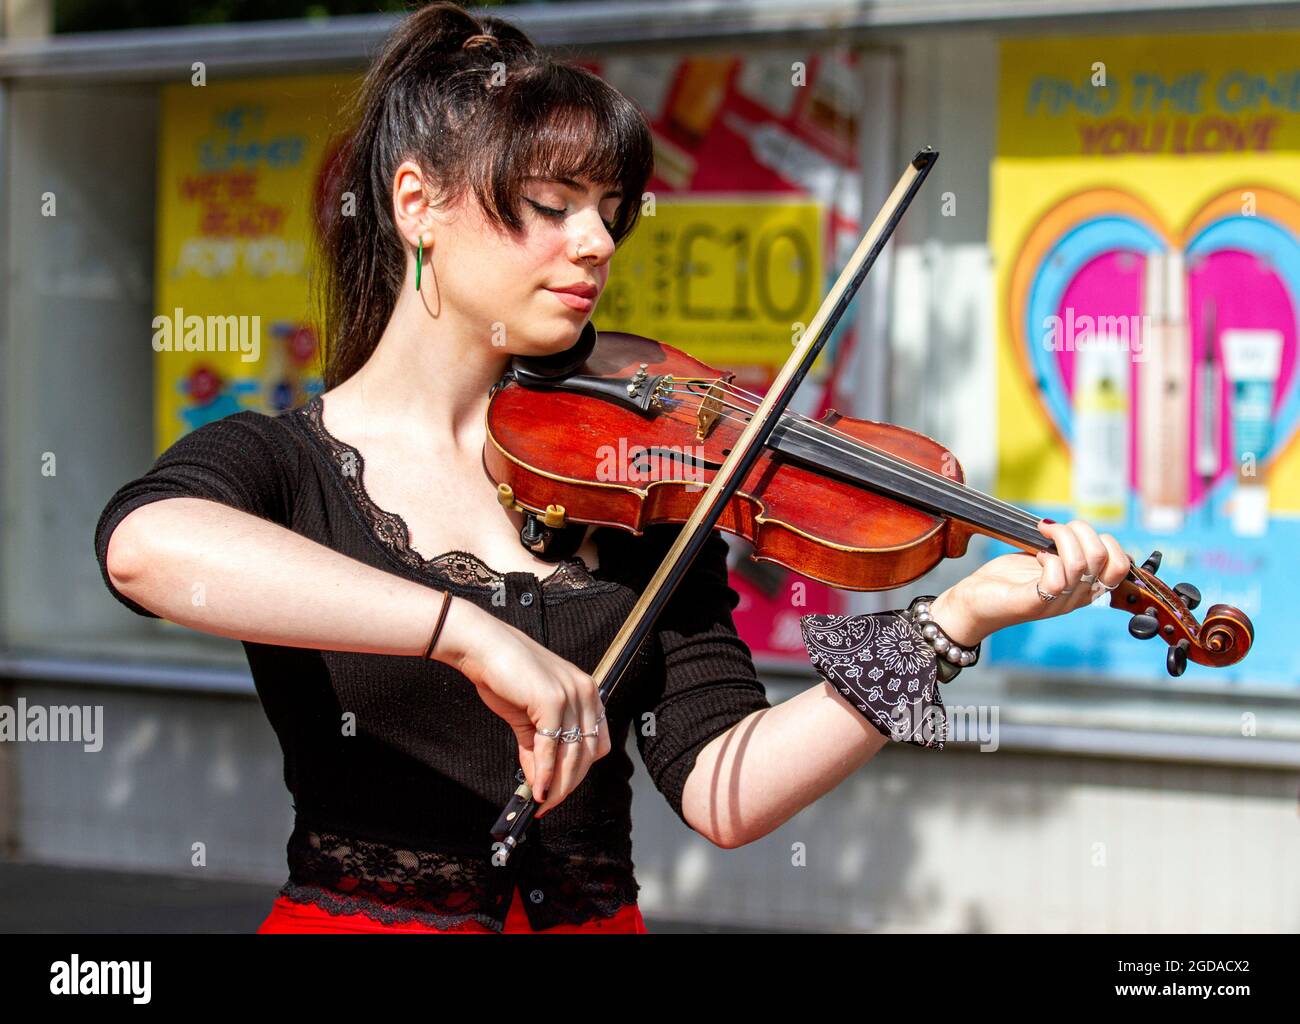 Dundee, Tayside, Scotland, UK. 12th Aug, 2021. UK Weather: A warm windy day with plenty sunshine across North East Scotland with temperatures reaching 18°C. A young fashionable female violinist playing classical music whilst busking outside The Overgate shopping centre in Dundee. Credit: Dundee Photographics/Alamy Live News Stock Photo